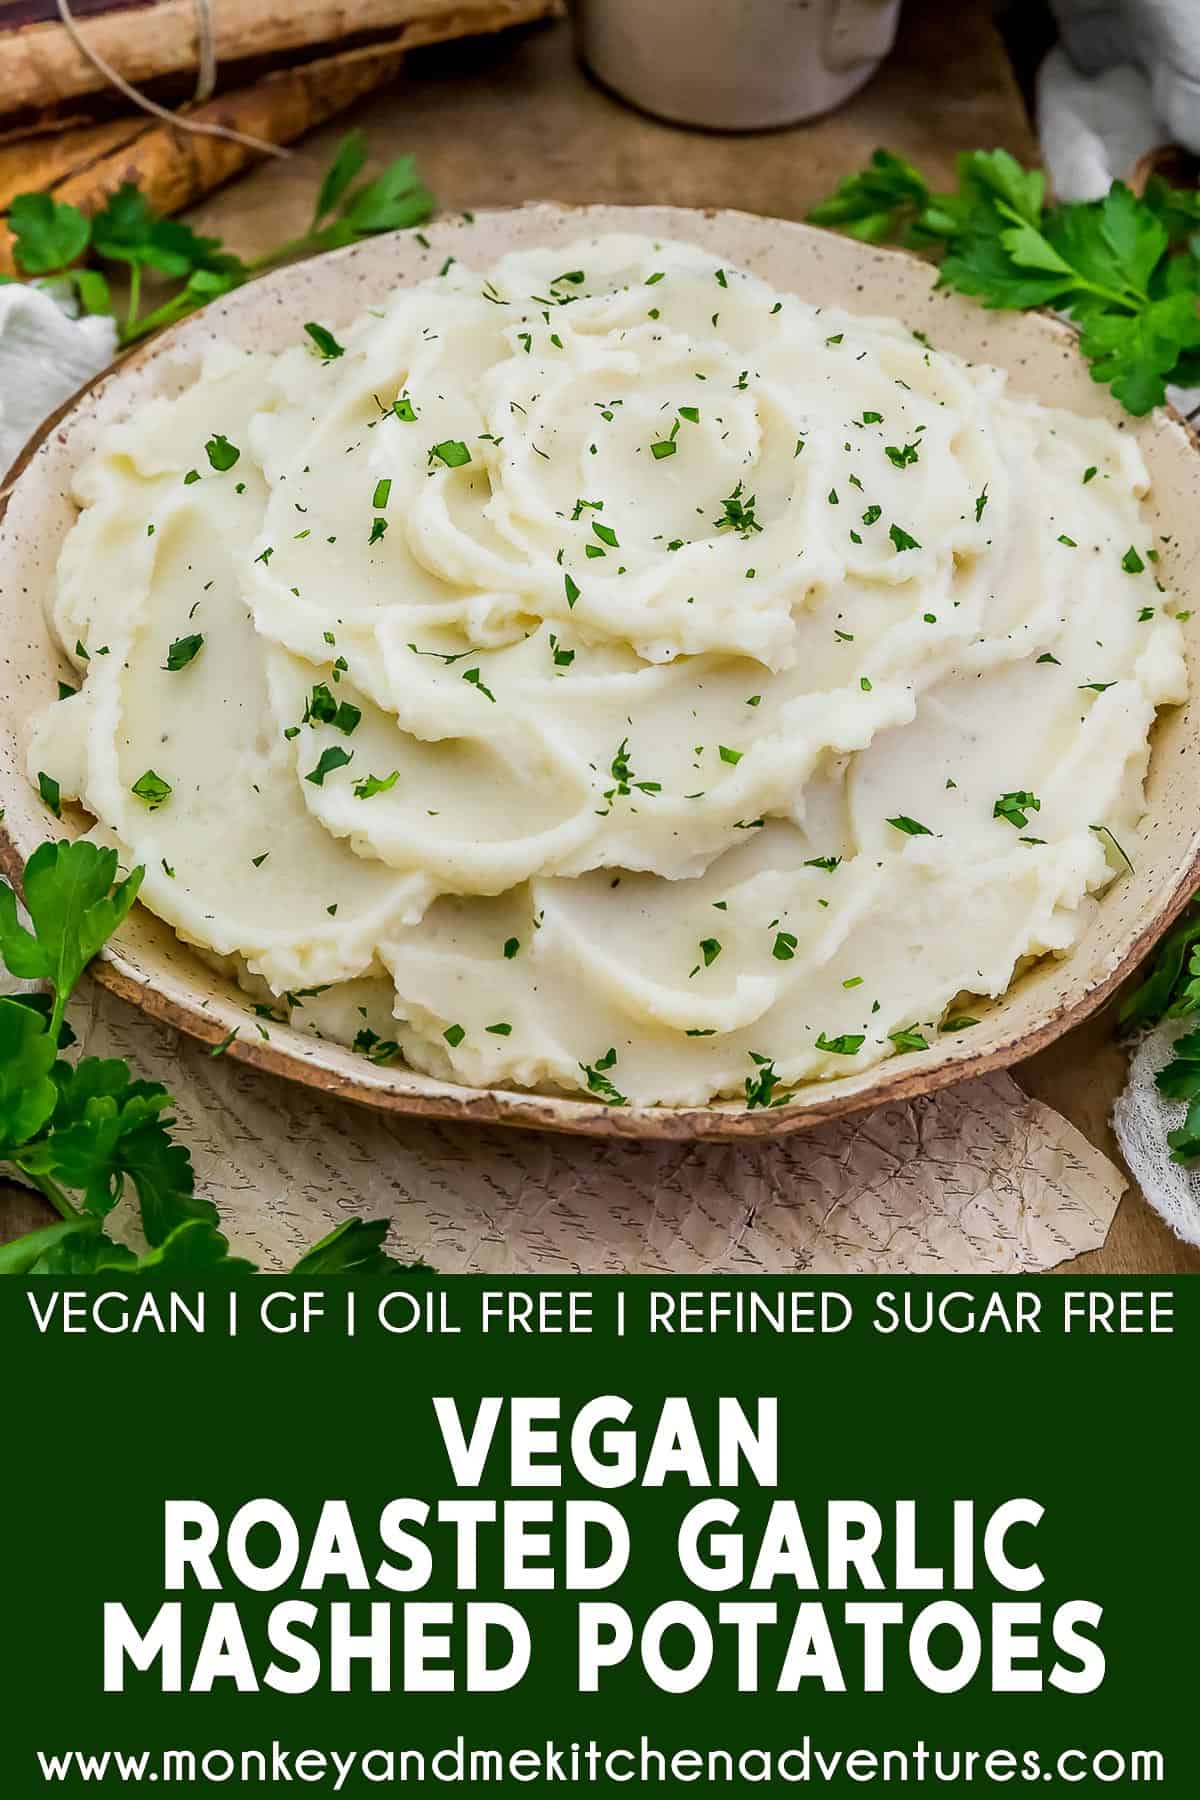 Vegan Roasted Garlic Mashed Potatoes with text description